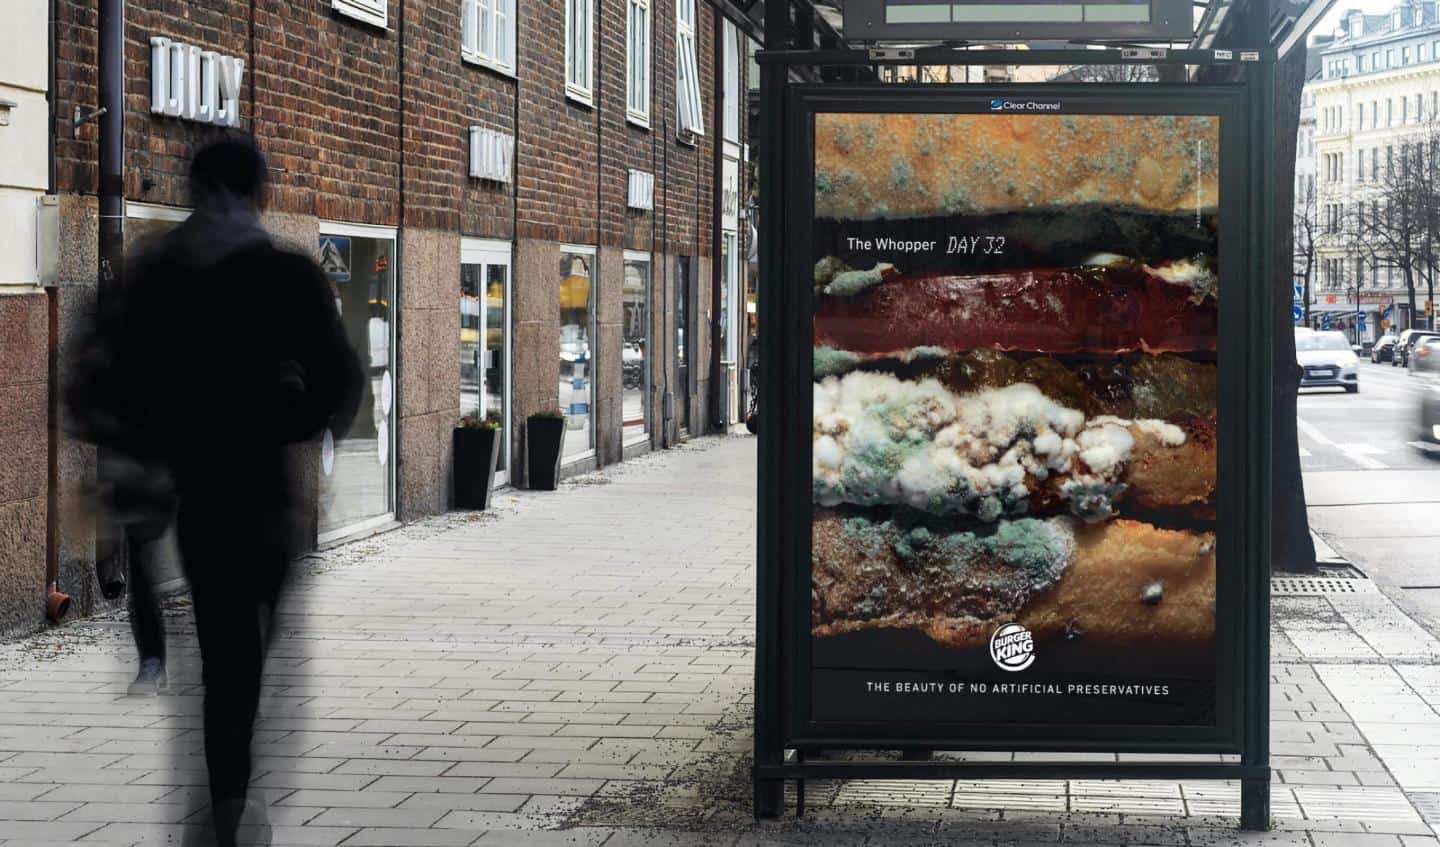 The Moldy Whopper: A Case Study in Advertising Effectiveness